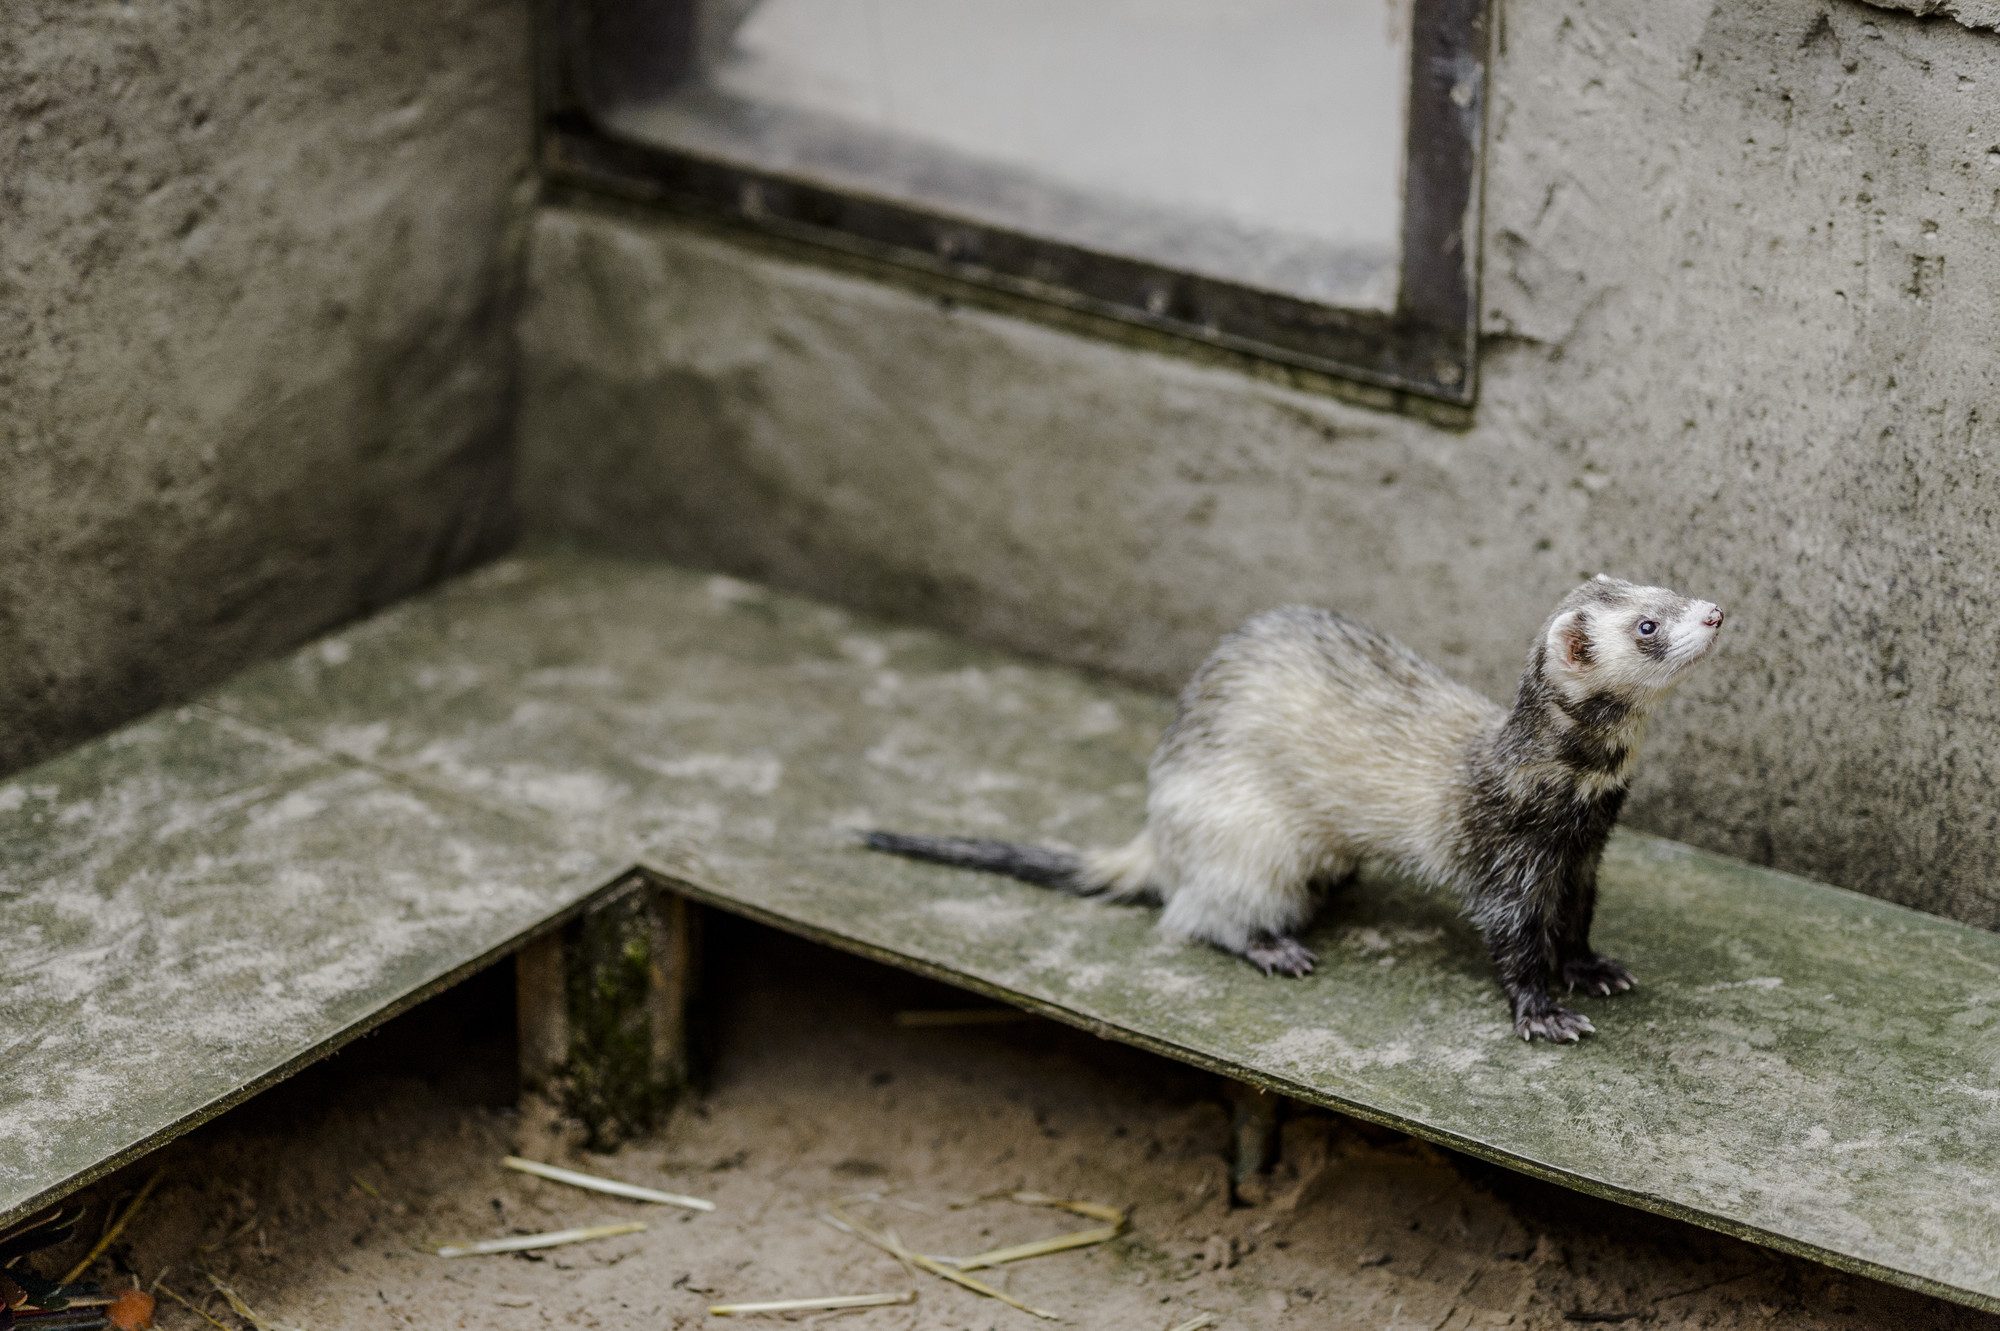 A chocolate ferret explores their accommodation.